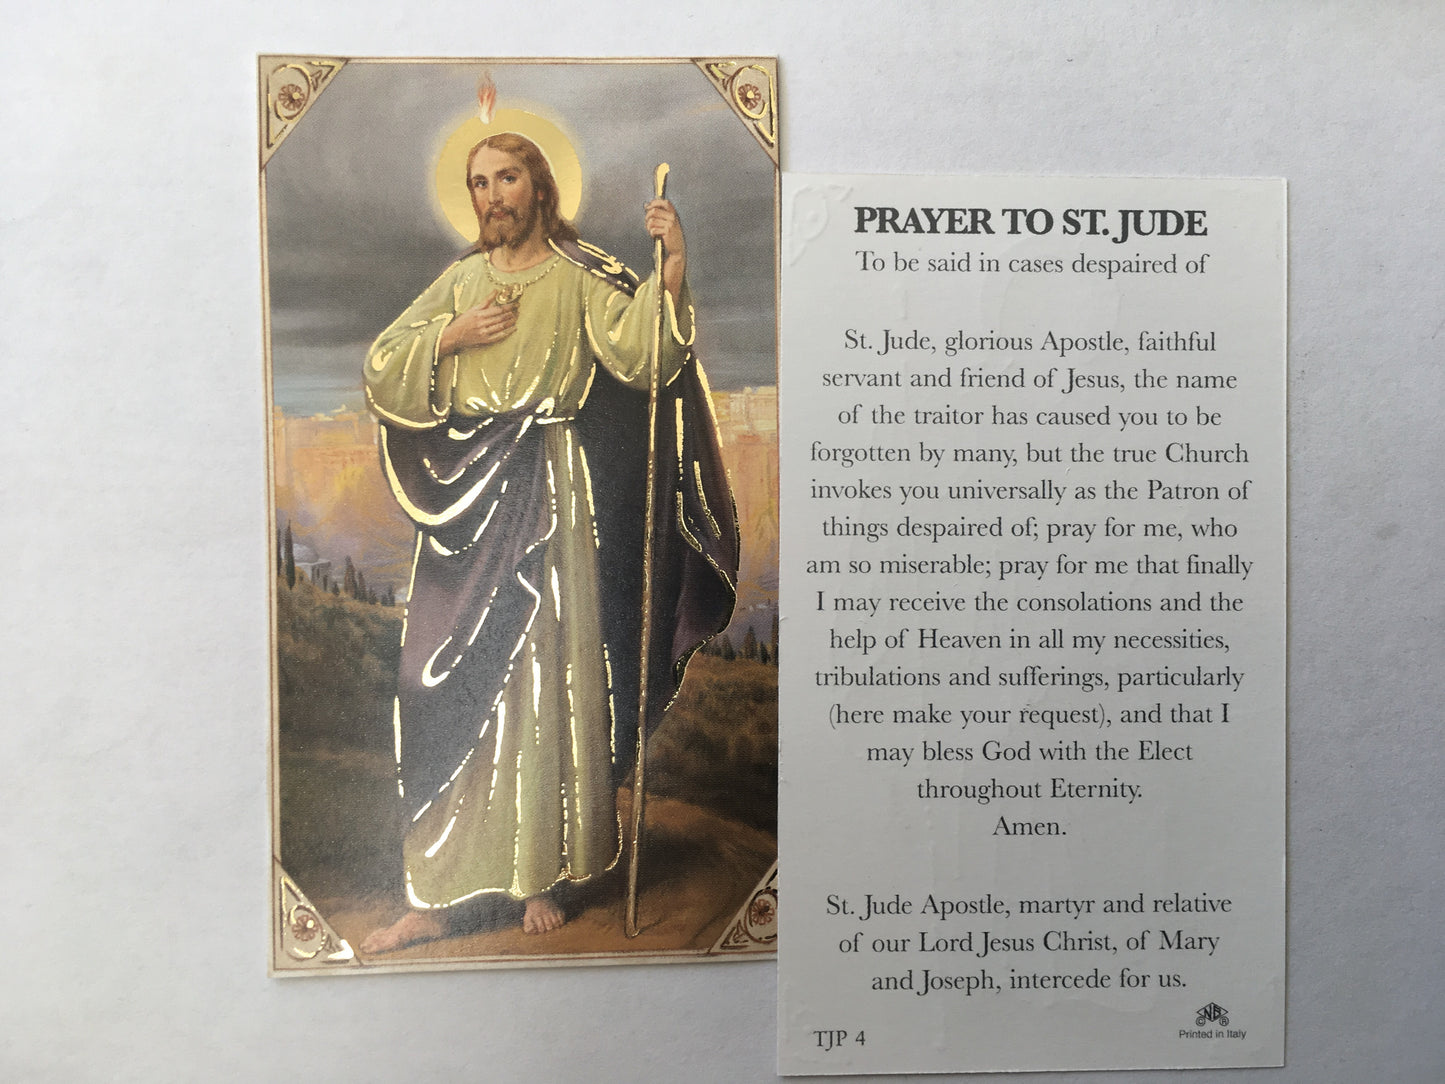 St. Jude - To be said in cases despaired of  - Holy Card